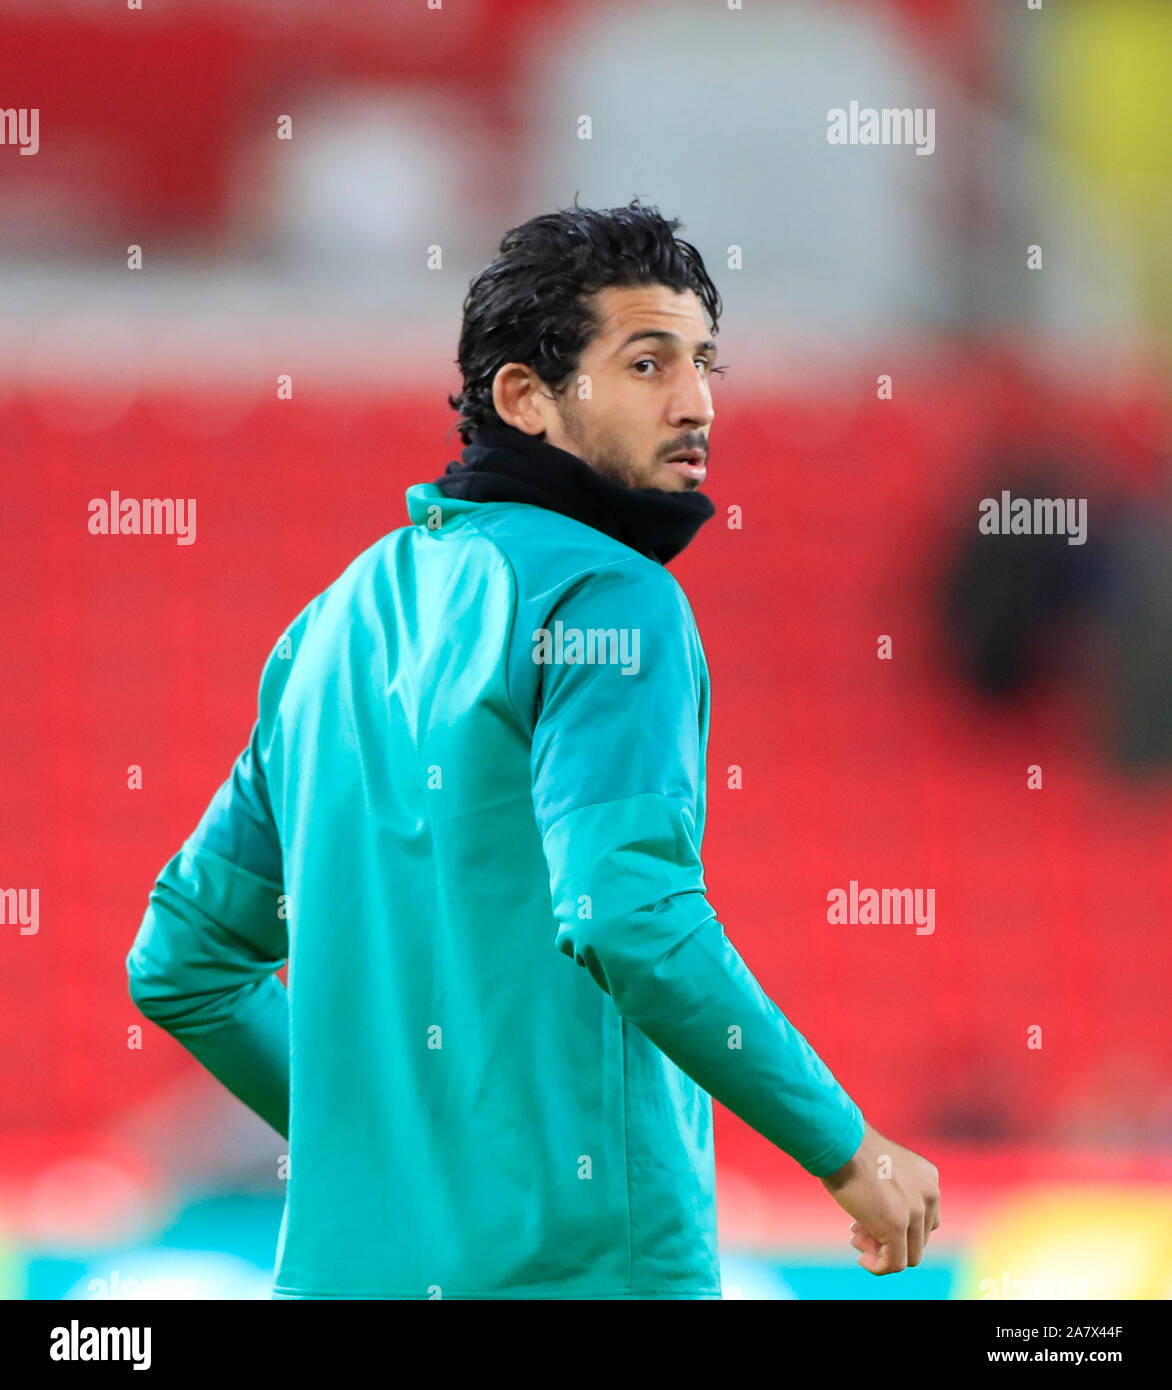 4th November 2019, Bet365 Stadium, Stoke-on-Trent, England; Sky Bet Championship, Stoke City v West Bromwich Albion : Ahmed Hegazy (26) of West Bromwich Albion warms up for the match Credit: Conor Molloy/News Images Stock Photo